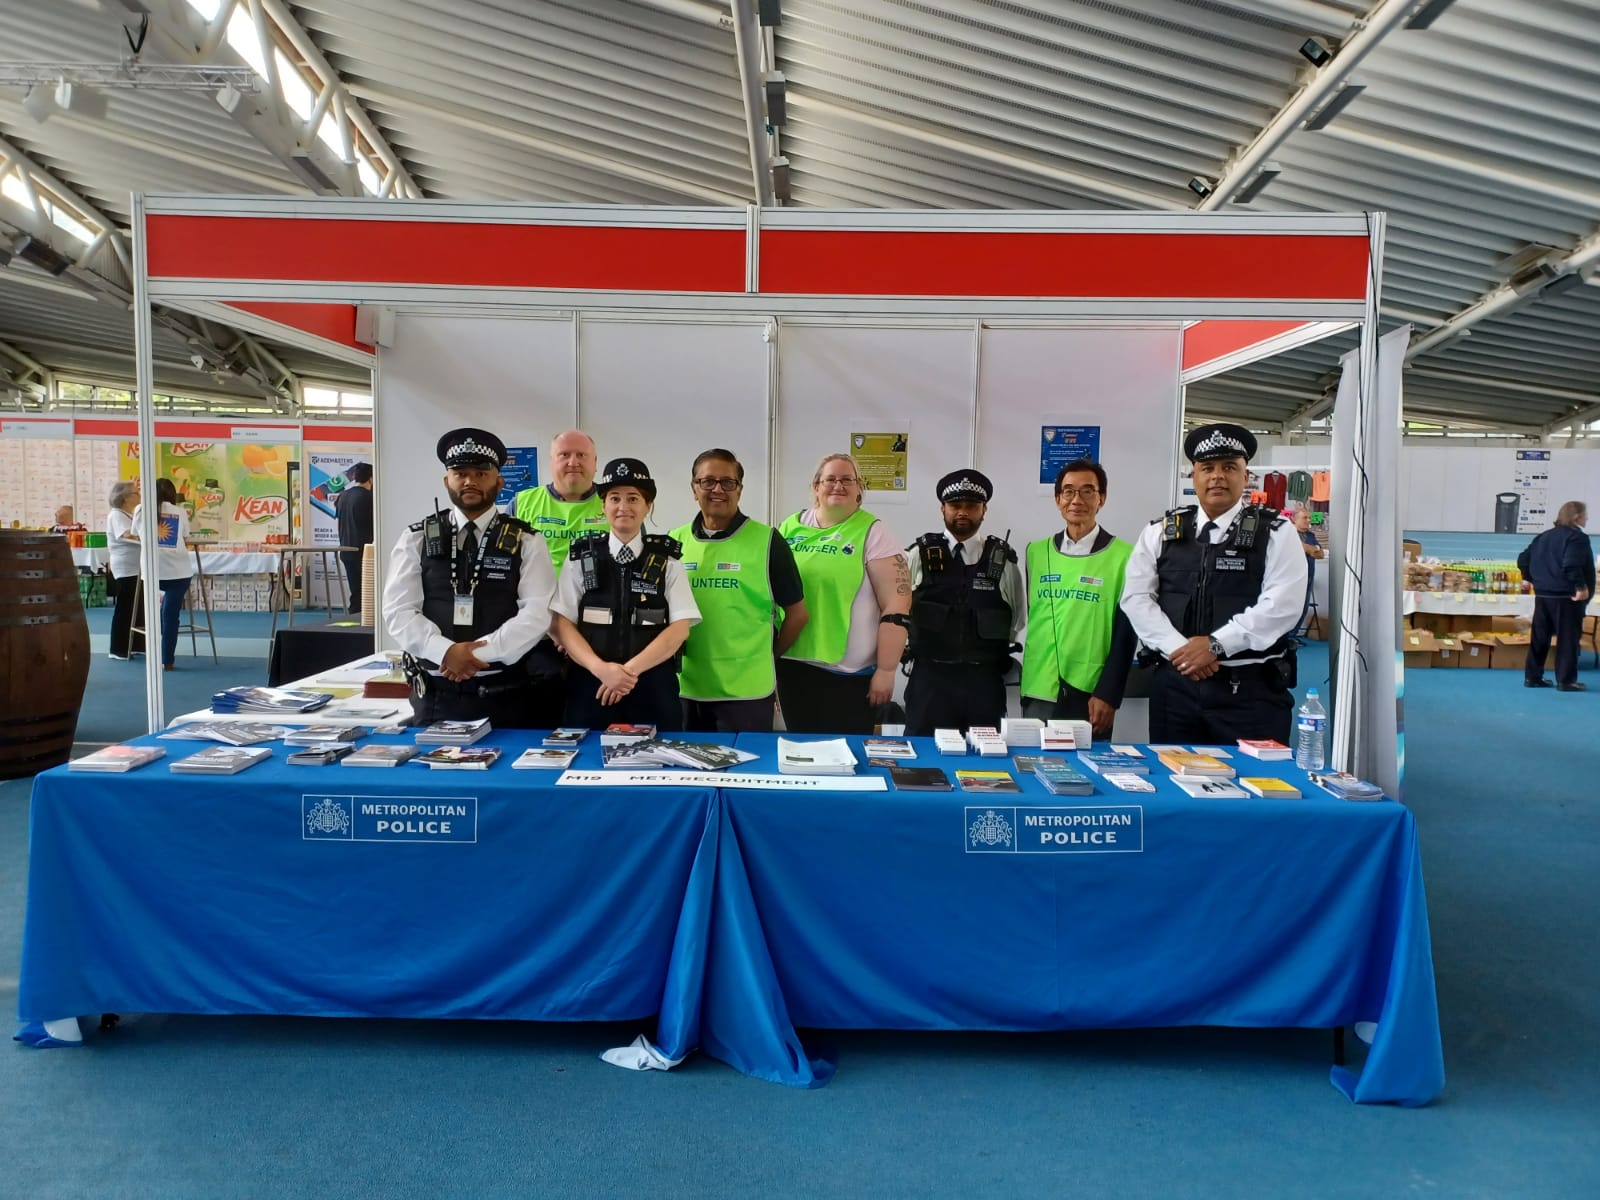 A team of Metropolitan Police officers standing on their recruitment stand inside a shopping centre.